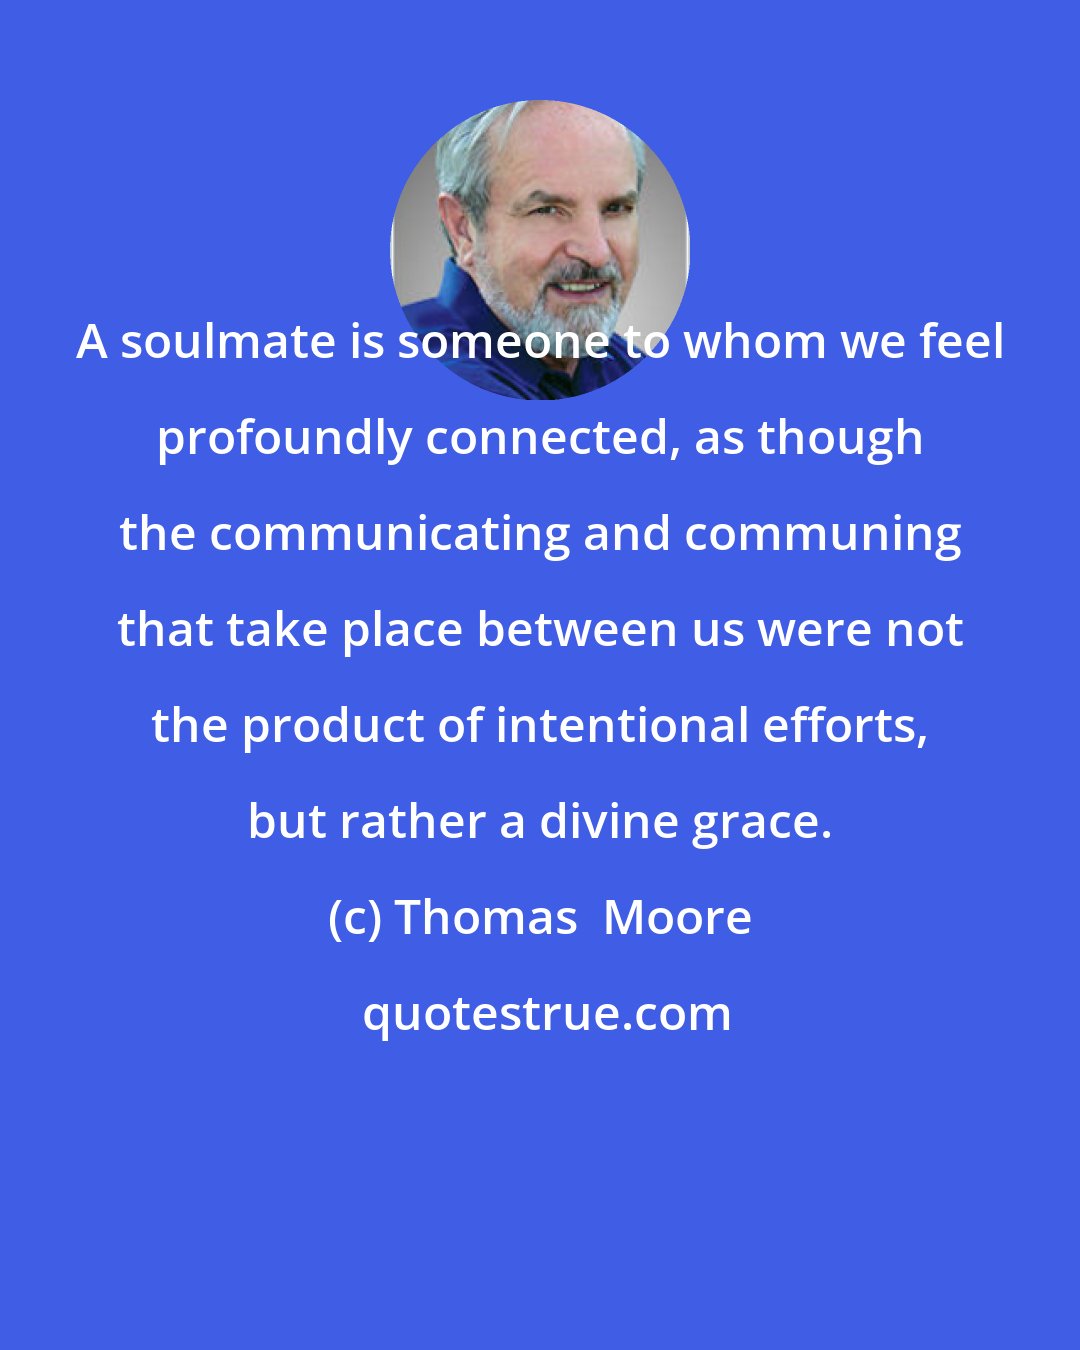 Thomas  Moore: A soulmate is someone to whom we feel profoundly connected, as though the communicating and communing that take place between us were not the product of intentional efforts, but rather a divine grace.